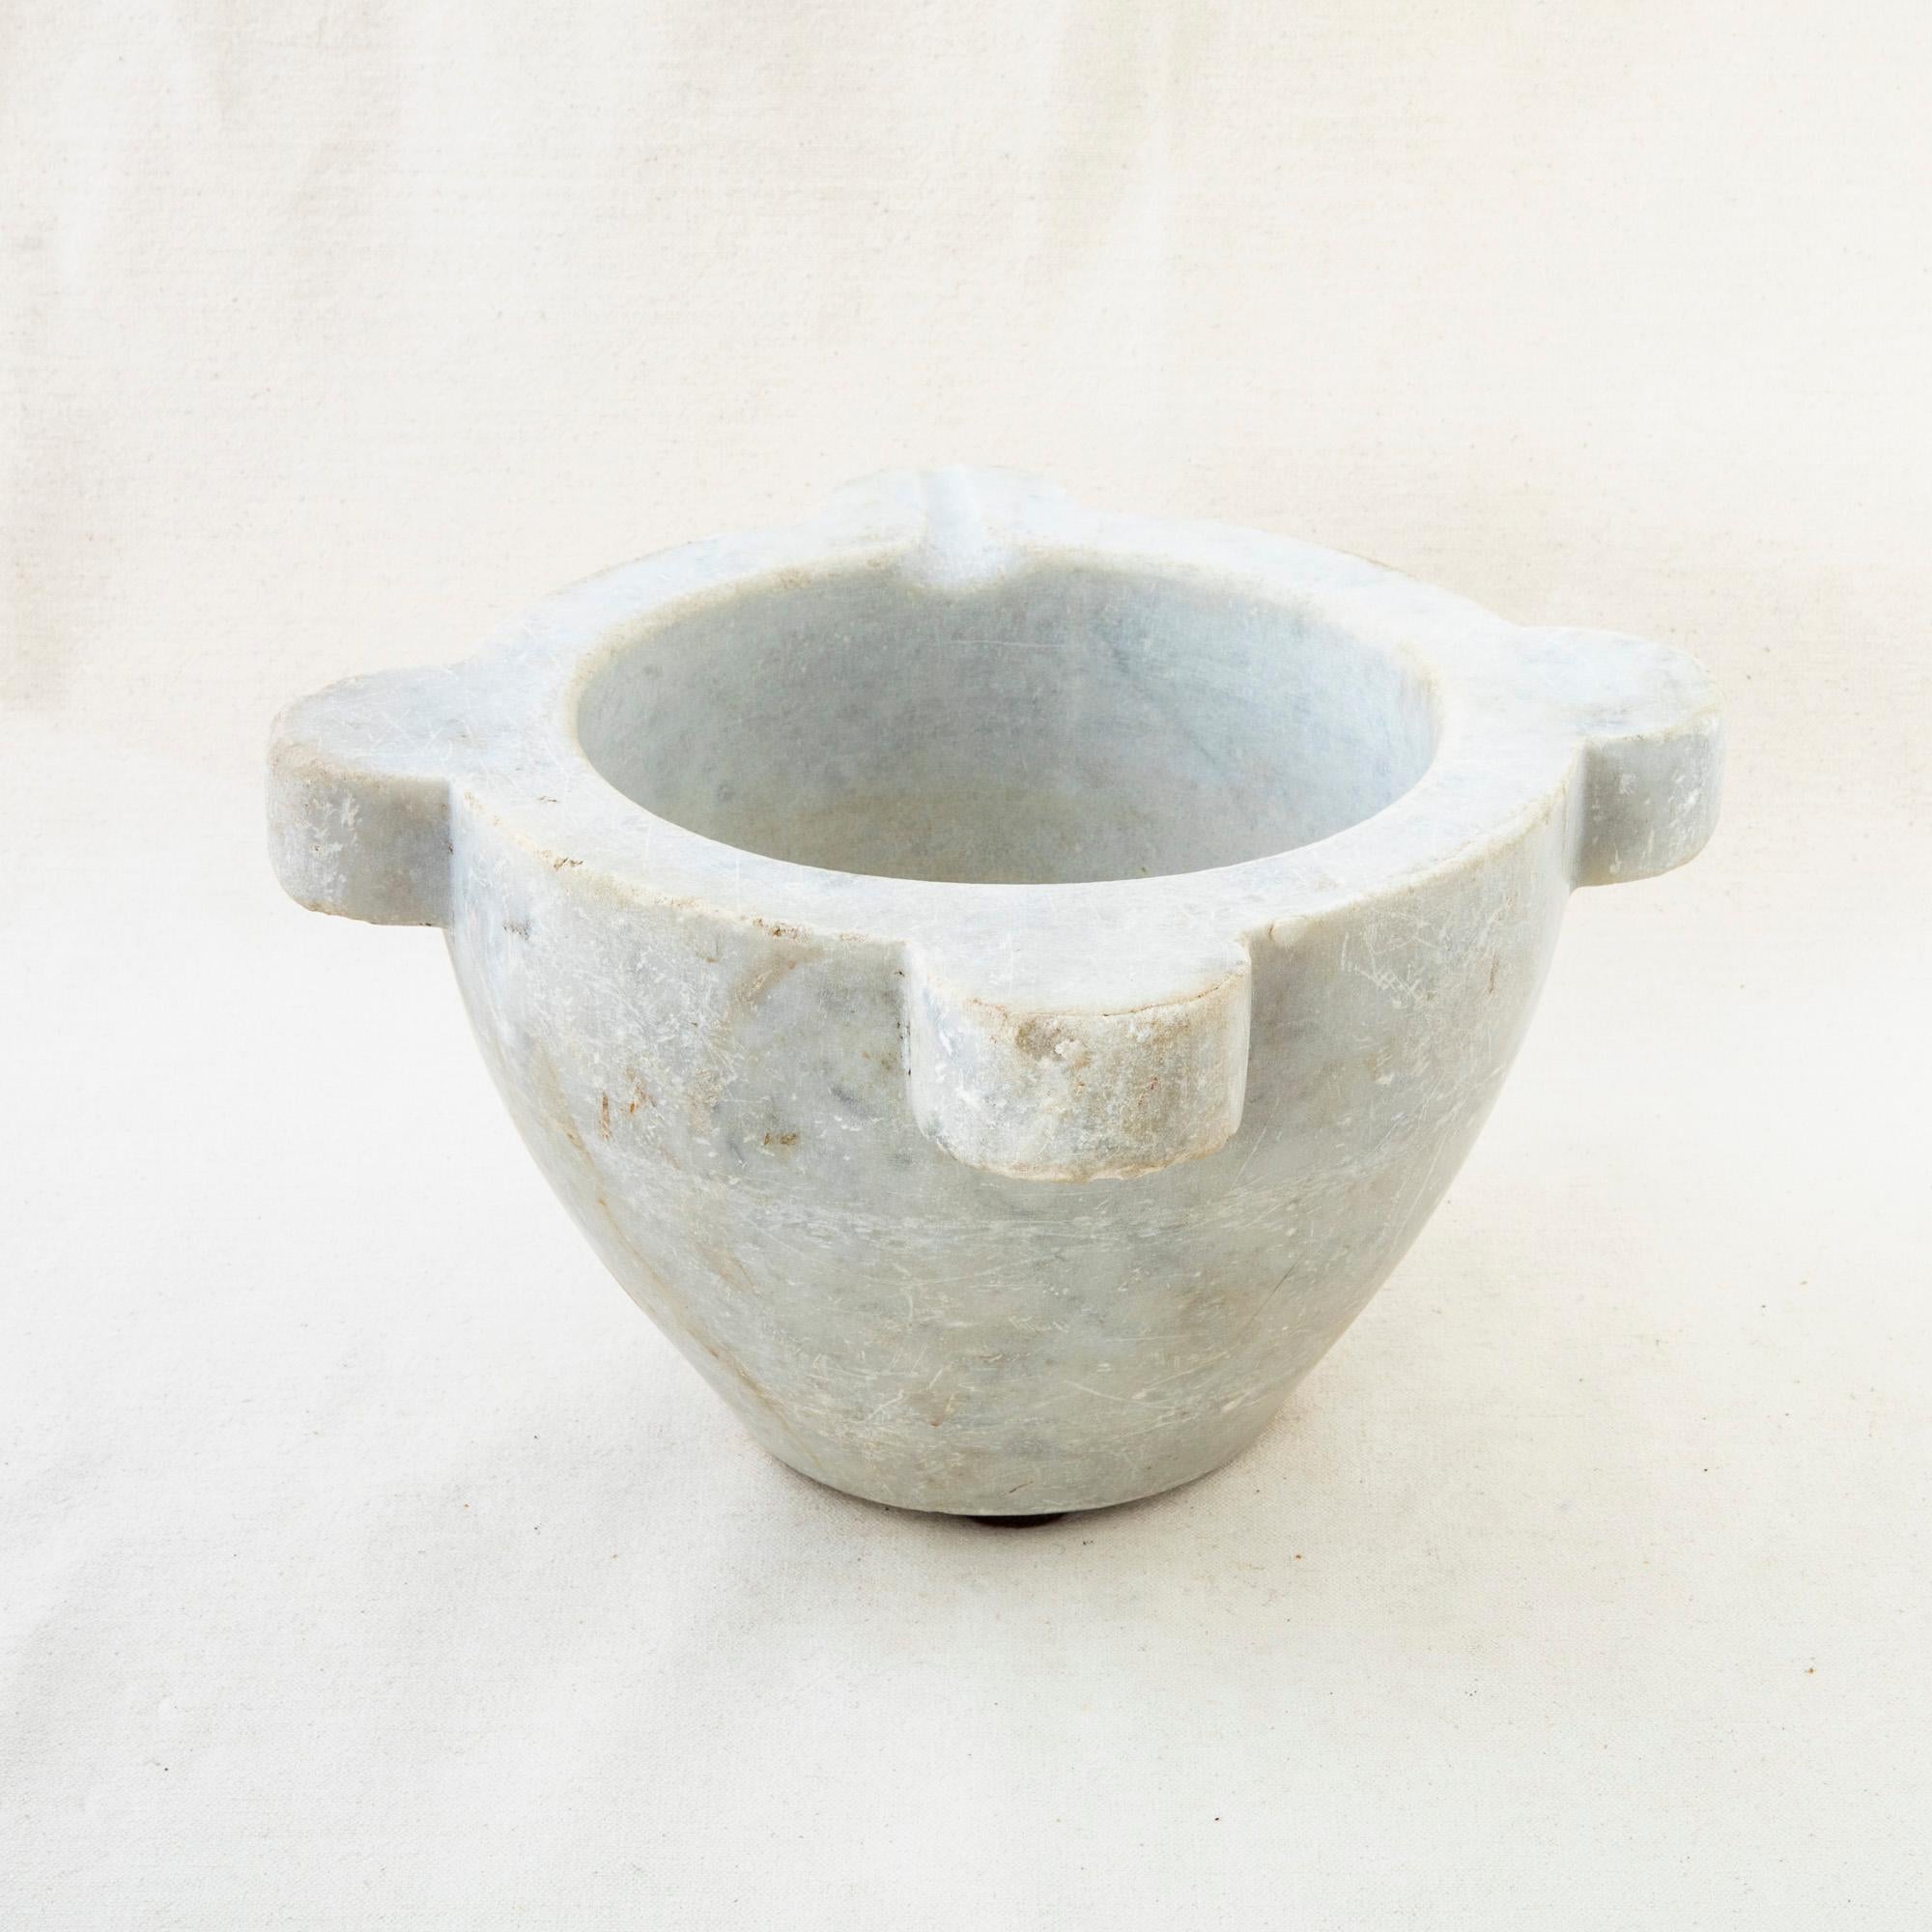 This large carrara marble mortar from the turn or the 20th century is made from a single block of unpolished marble. Once used to grind herbs, it can now serve as a planter, bowl, or vase and is conducive to both indoor and outdoor use. It would